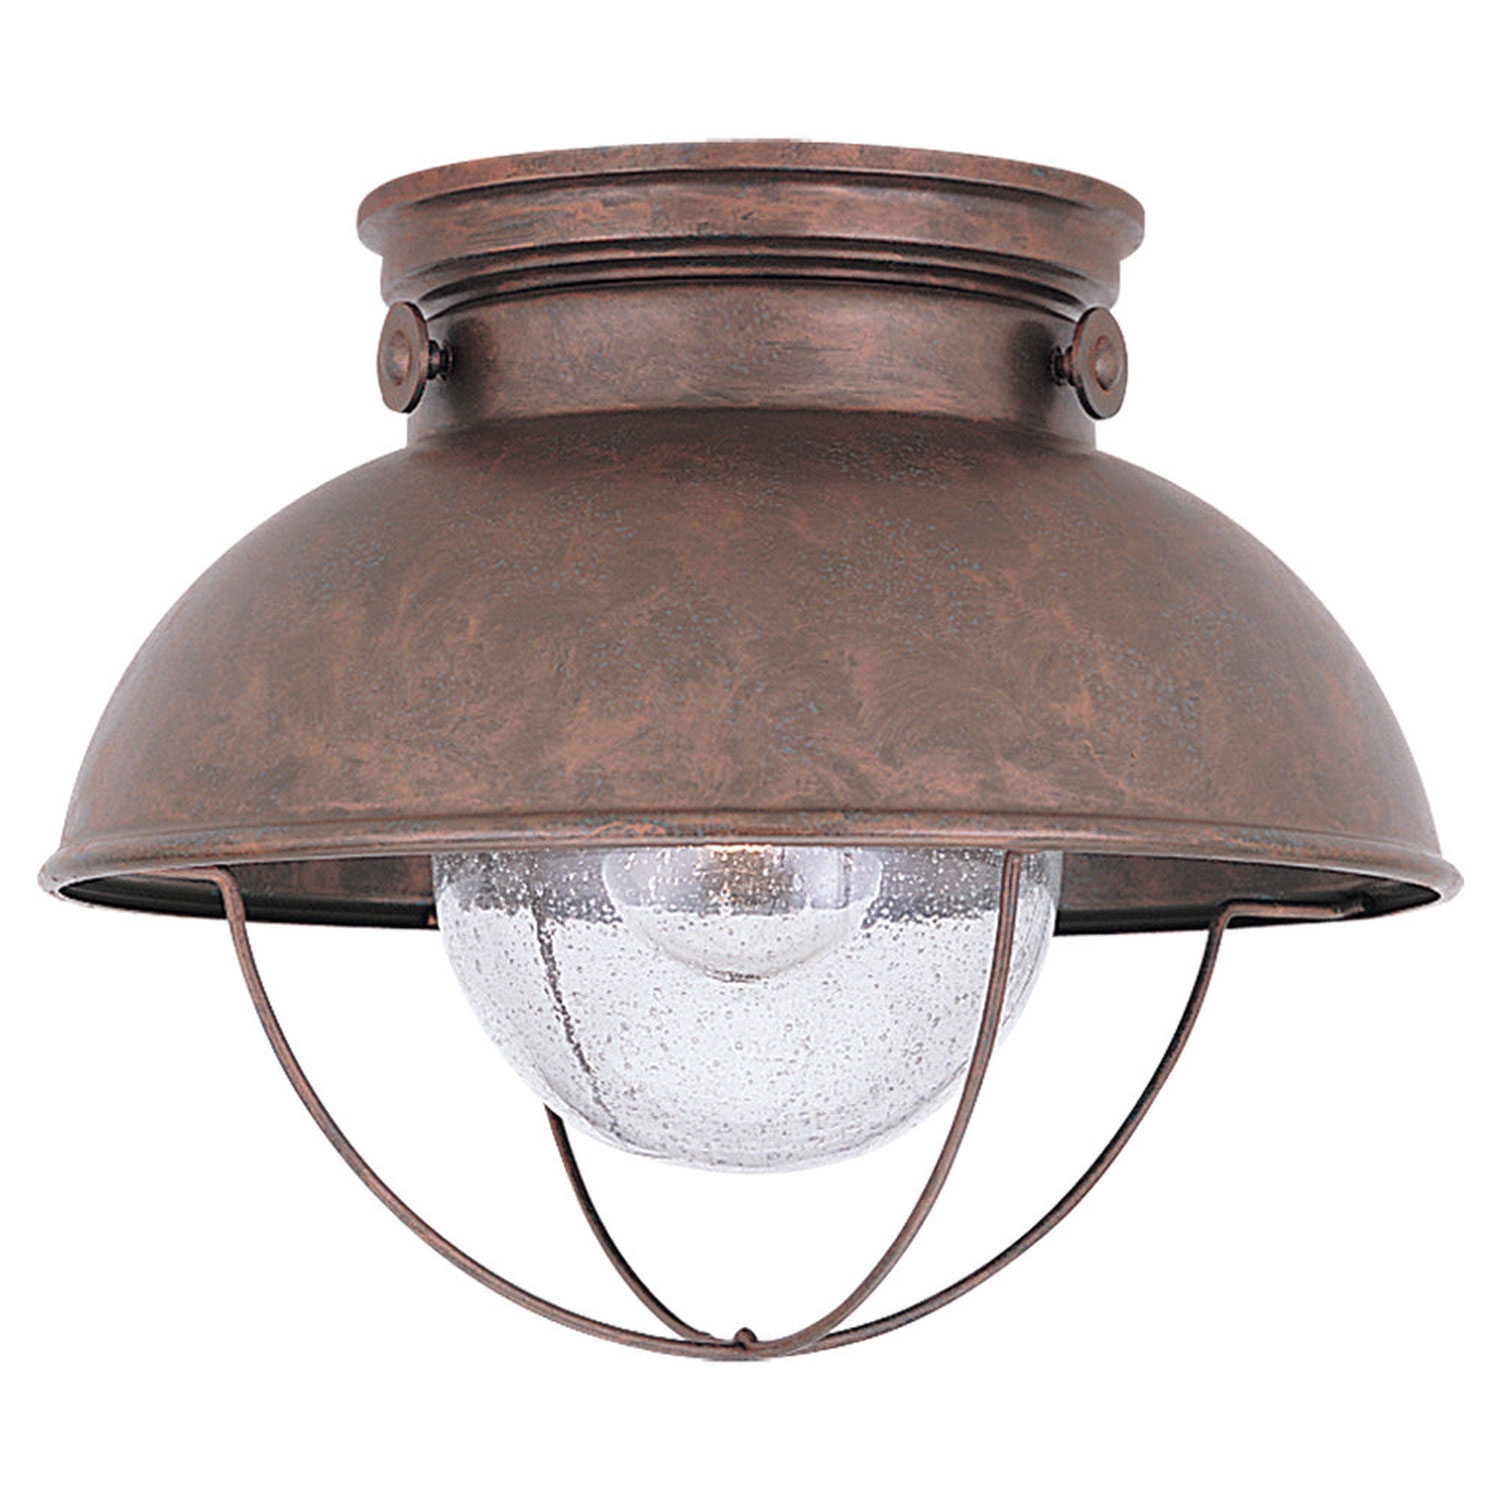 Permalink to Outdoor Porch Ceiling Light Fixtures